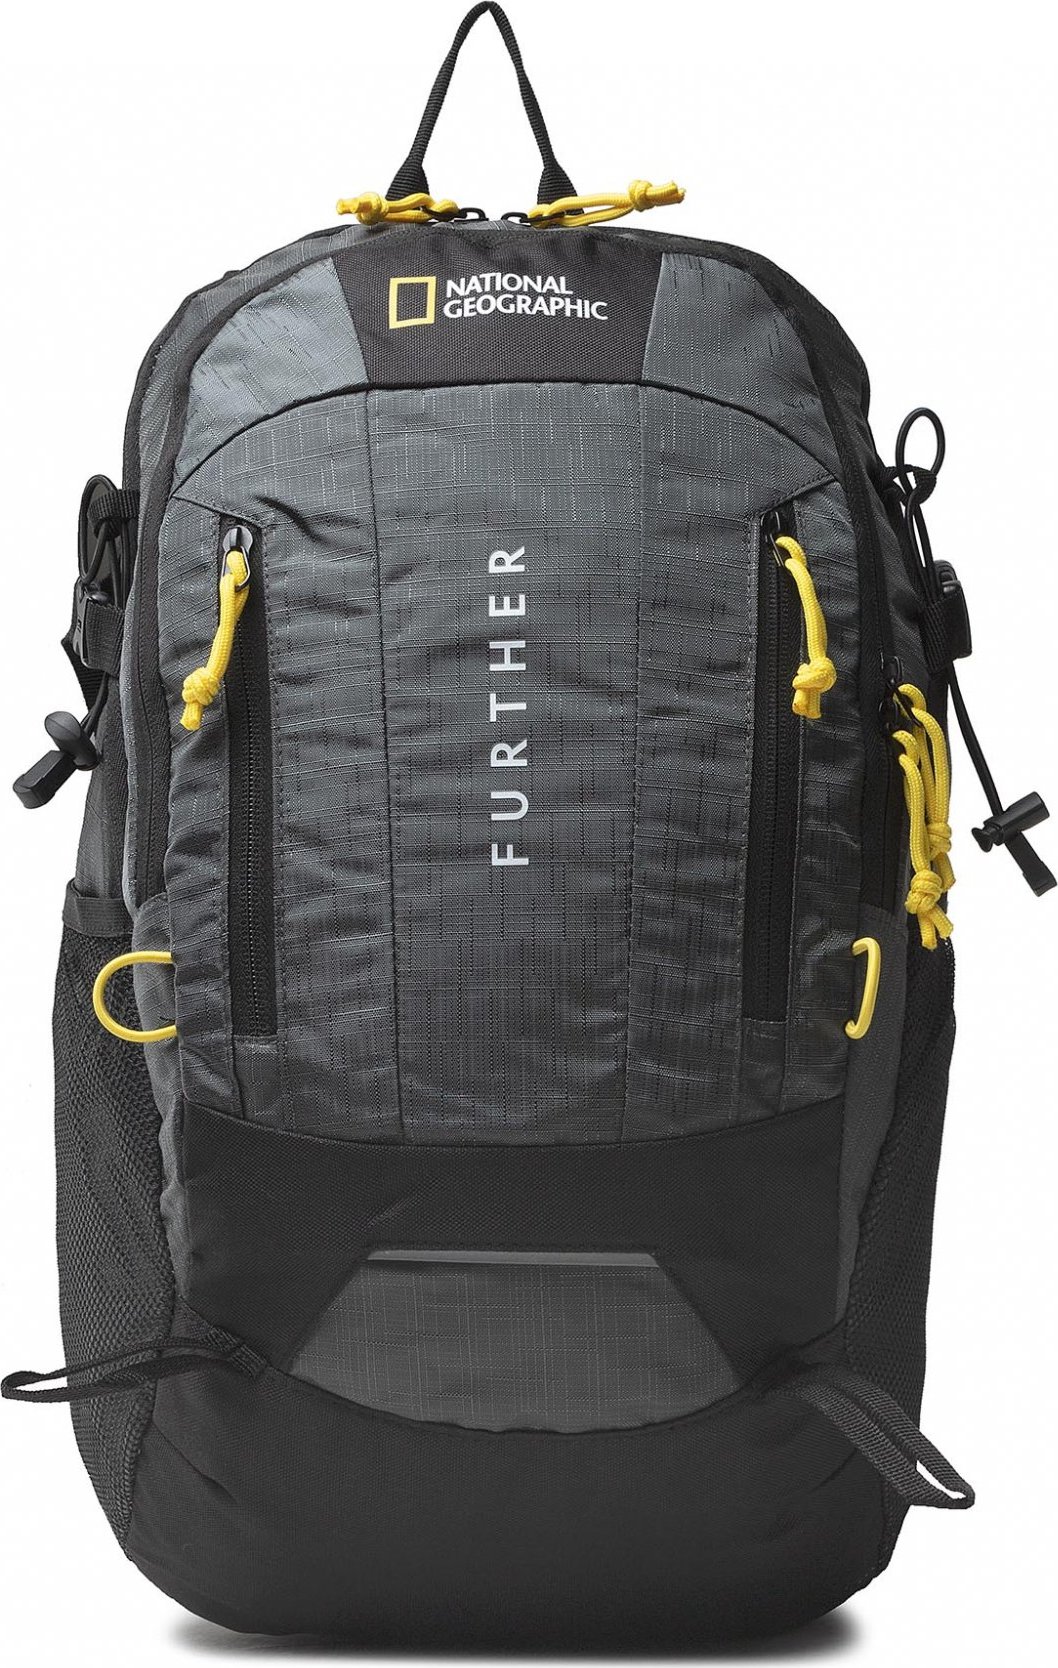 National Geographic Backpack N16084.22